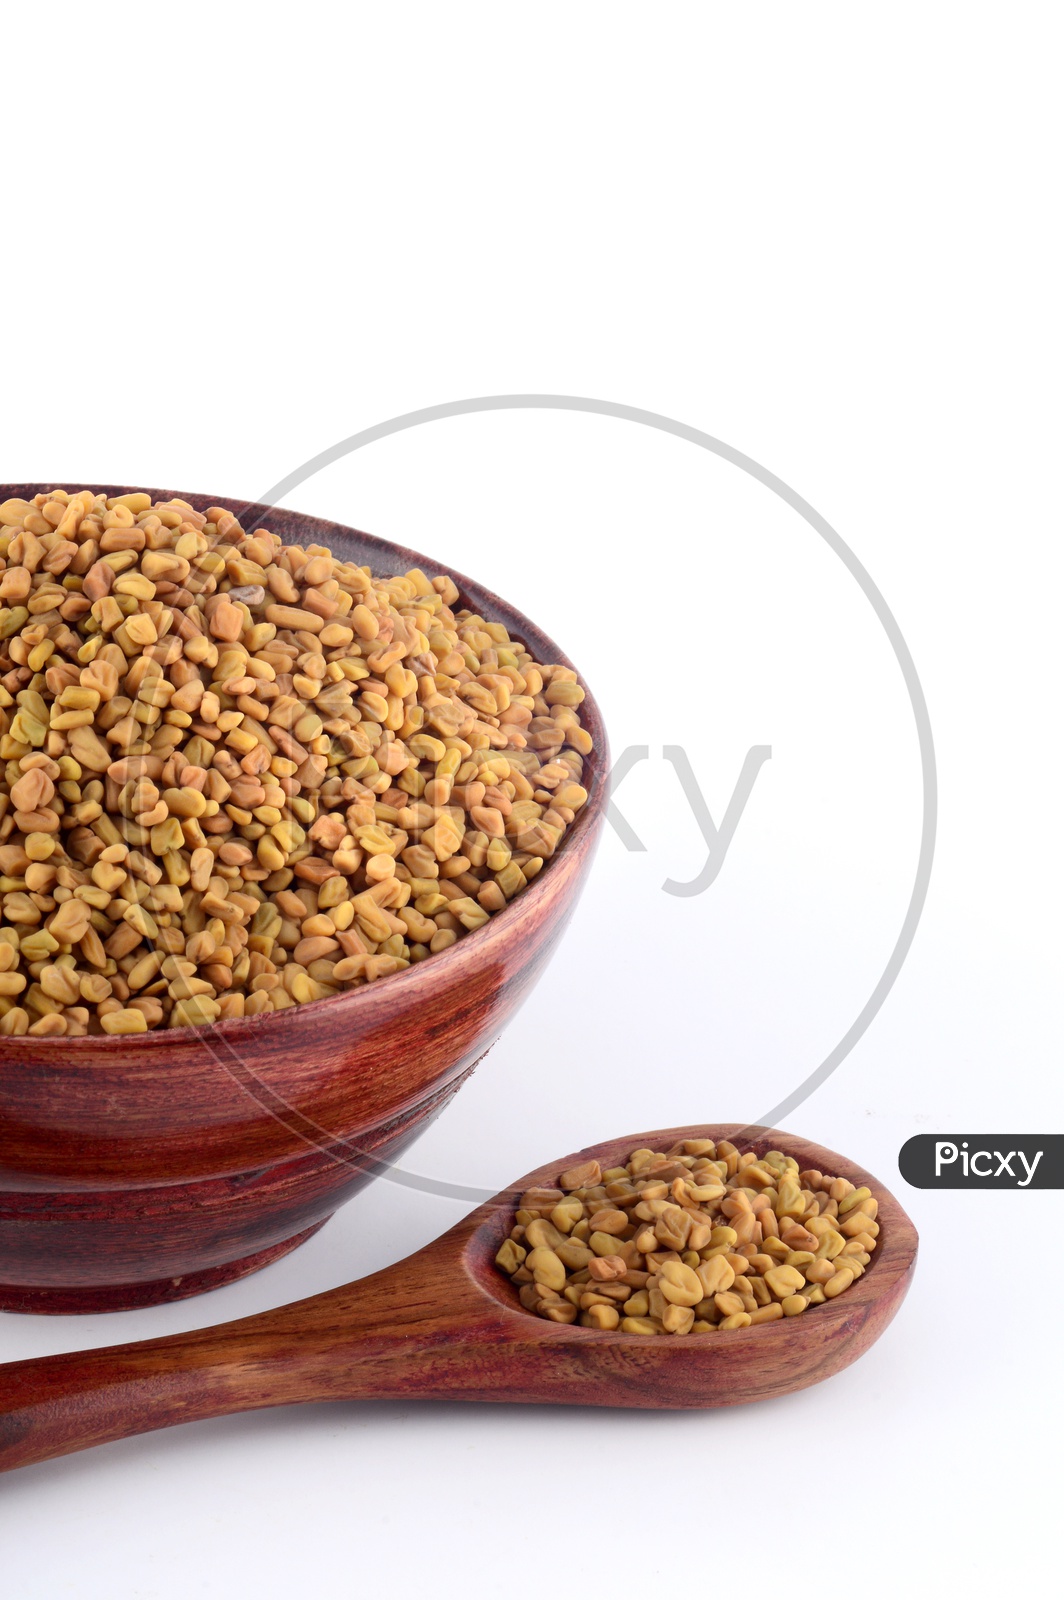 Fenugreek seeds in wooden bowl and spoon isolated on white background